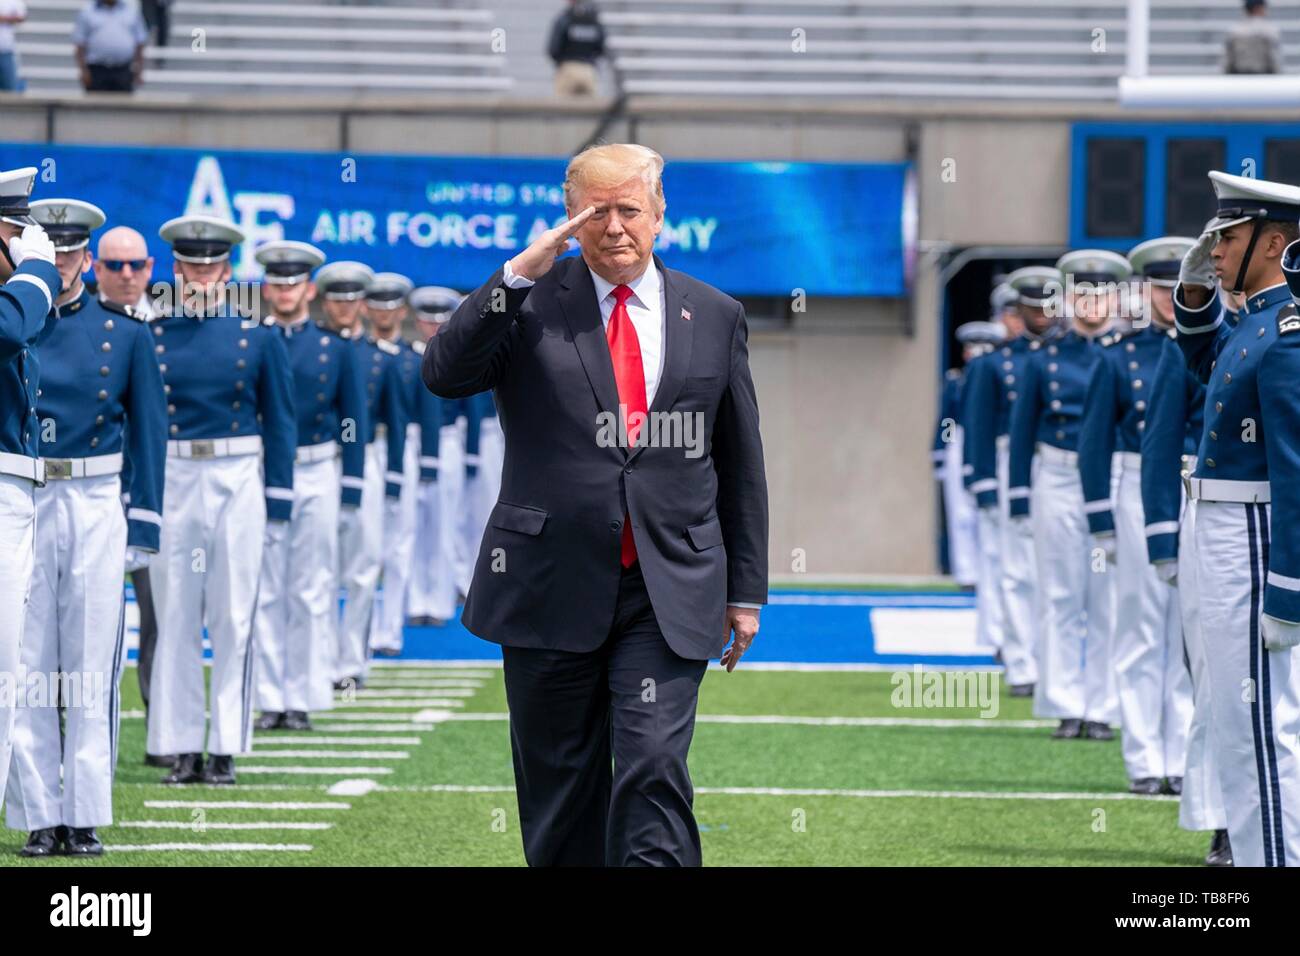 U.S President Donald Trump salutes as he walks past the honor guard on arrival for the the U.S. Air Force Academy Graduation Ceremony at the USAF Academy Falcon Stadium May 30, 2019 in Colorado Springs, Colorado. Credit: Planetpix/Alamy Live News Stock Photo